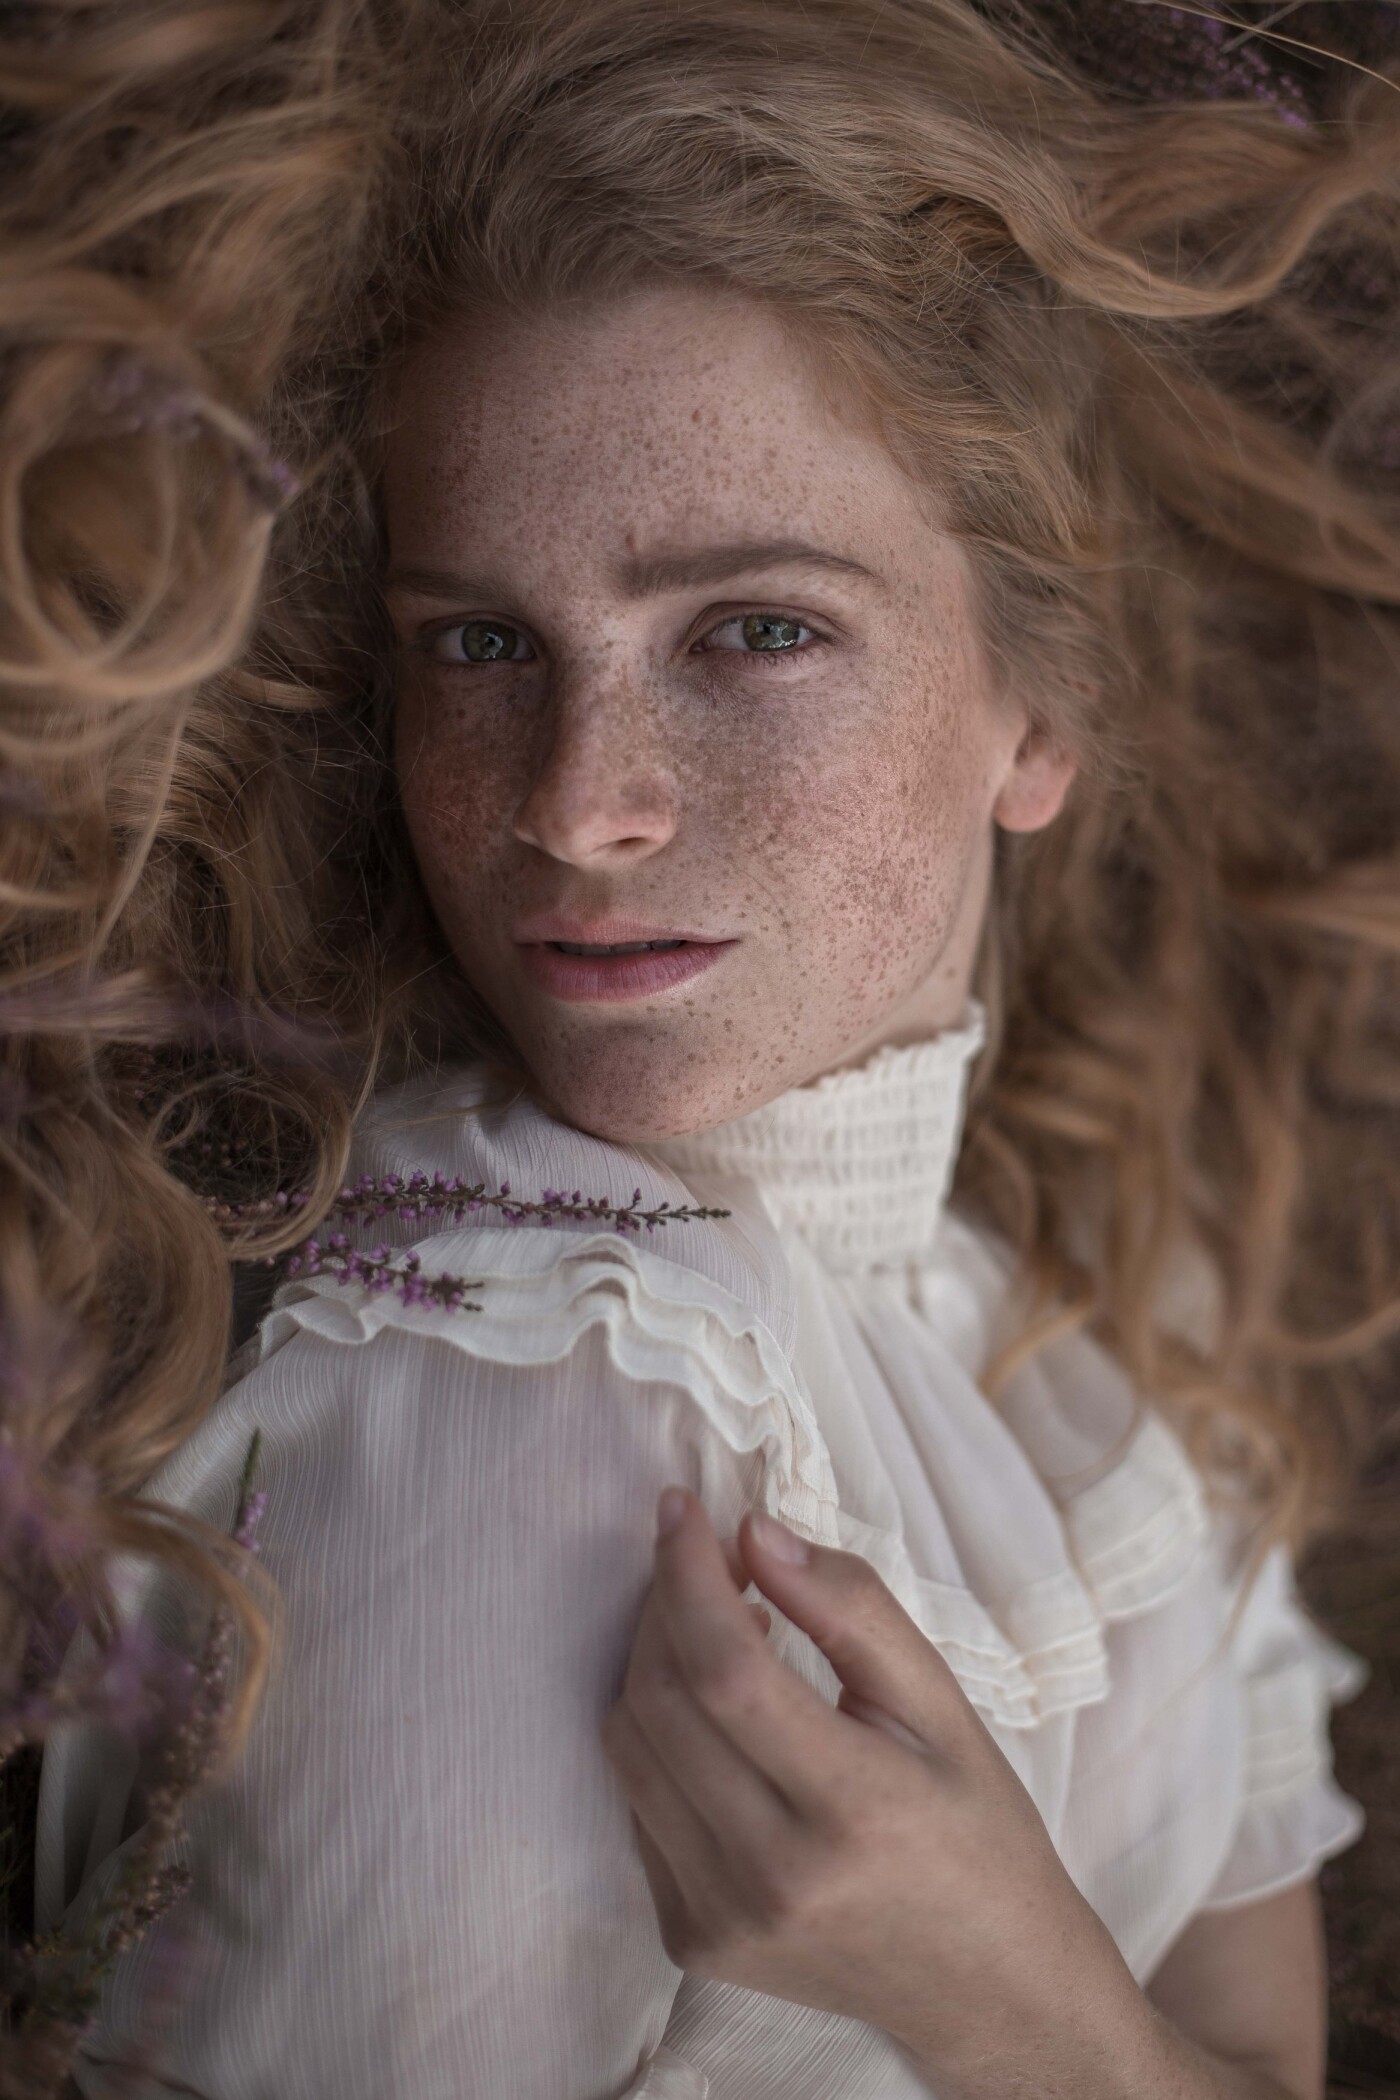 This portrait i have made with my awesome muse @elinee_vdb! Only the natural beautiful model. She lay on the ground and her wonderful hair framed this picture!